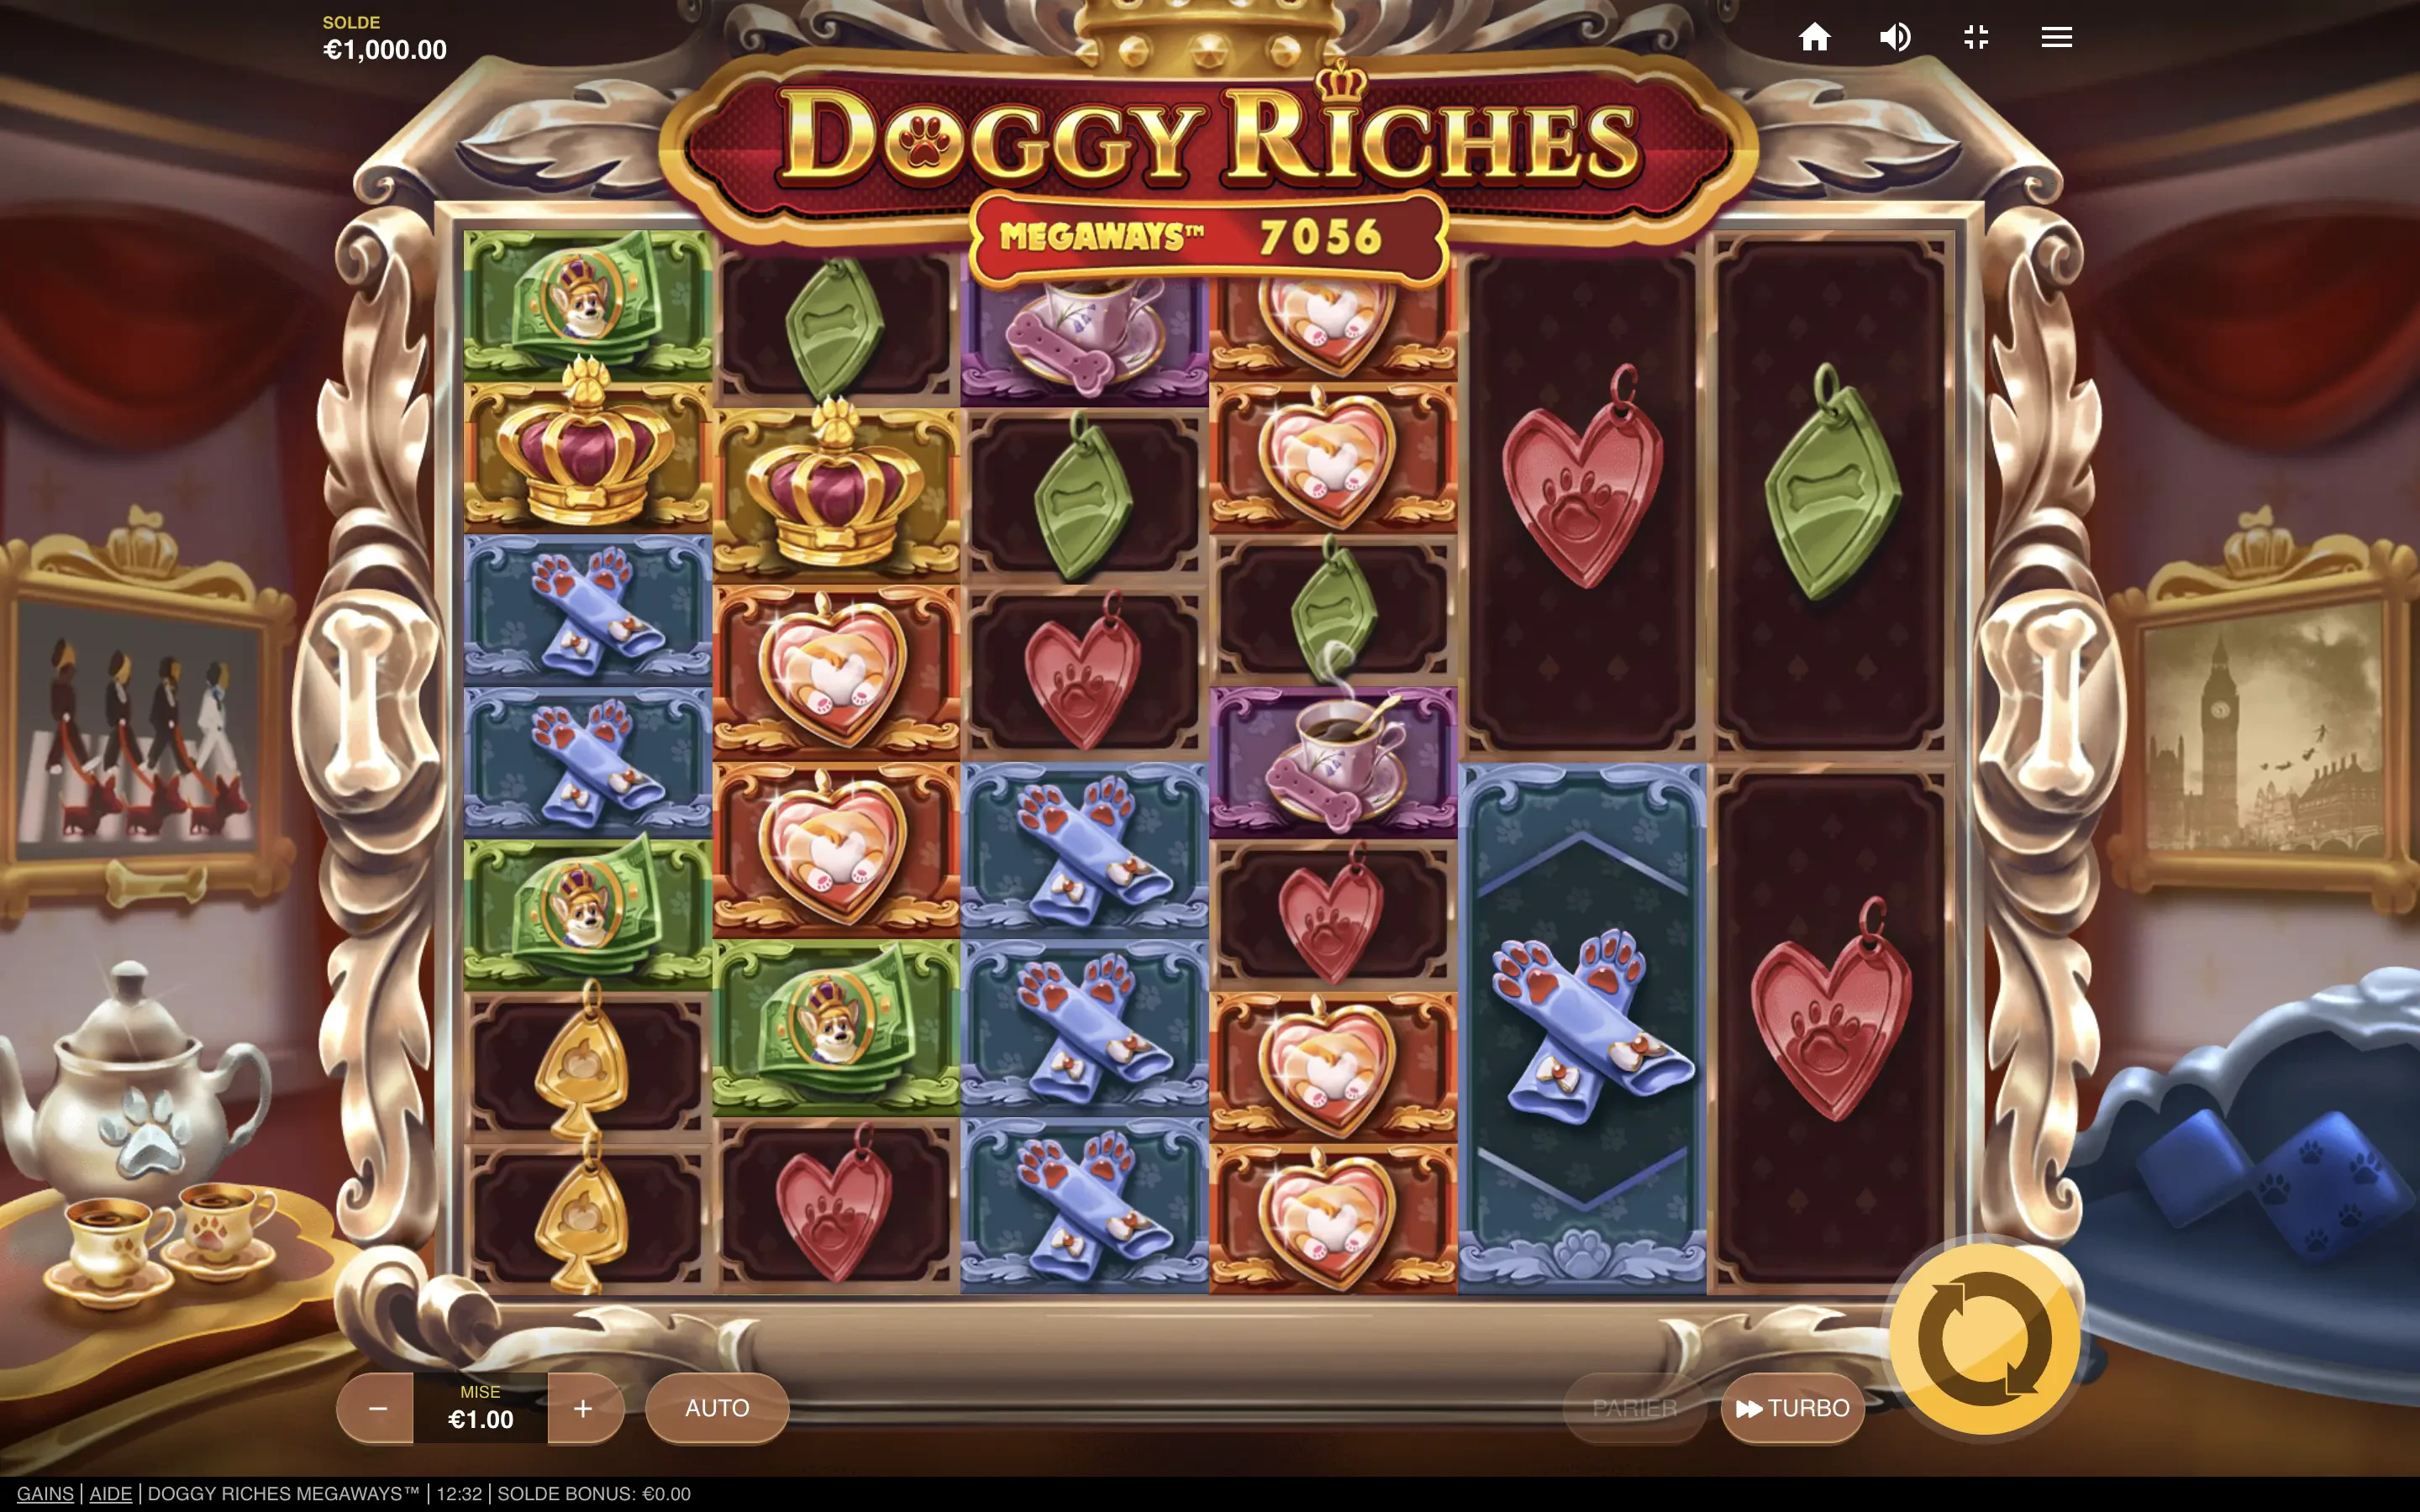 The Doggy Riches Megaways slot machine by Red Tiger